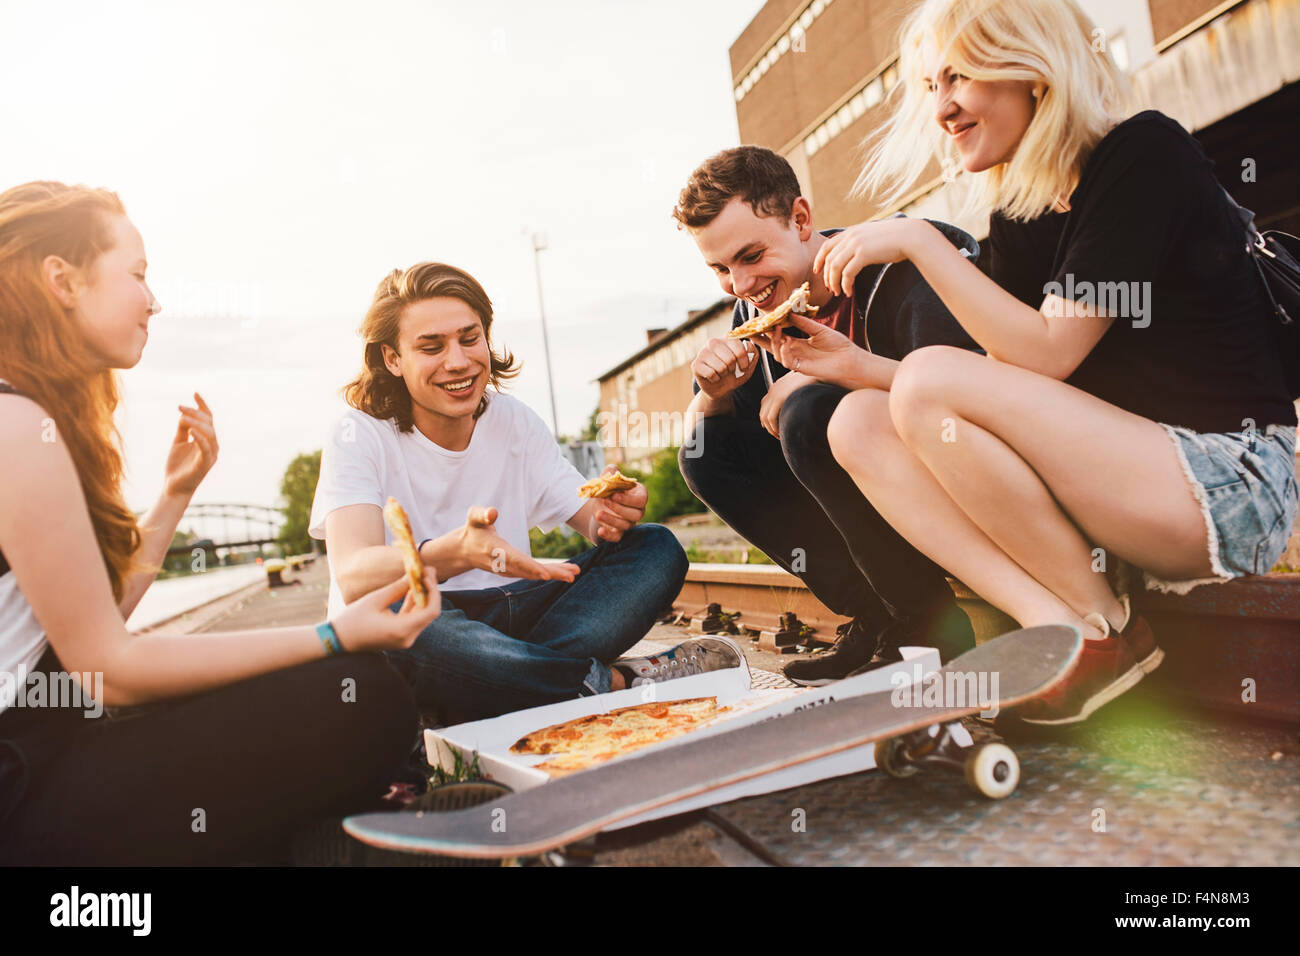 Friends sitting together outdoors sharing a pizza Stock Photo